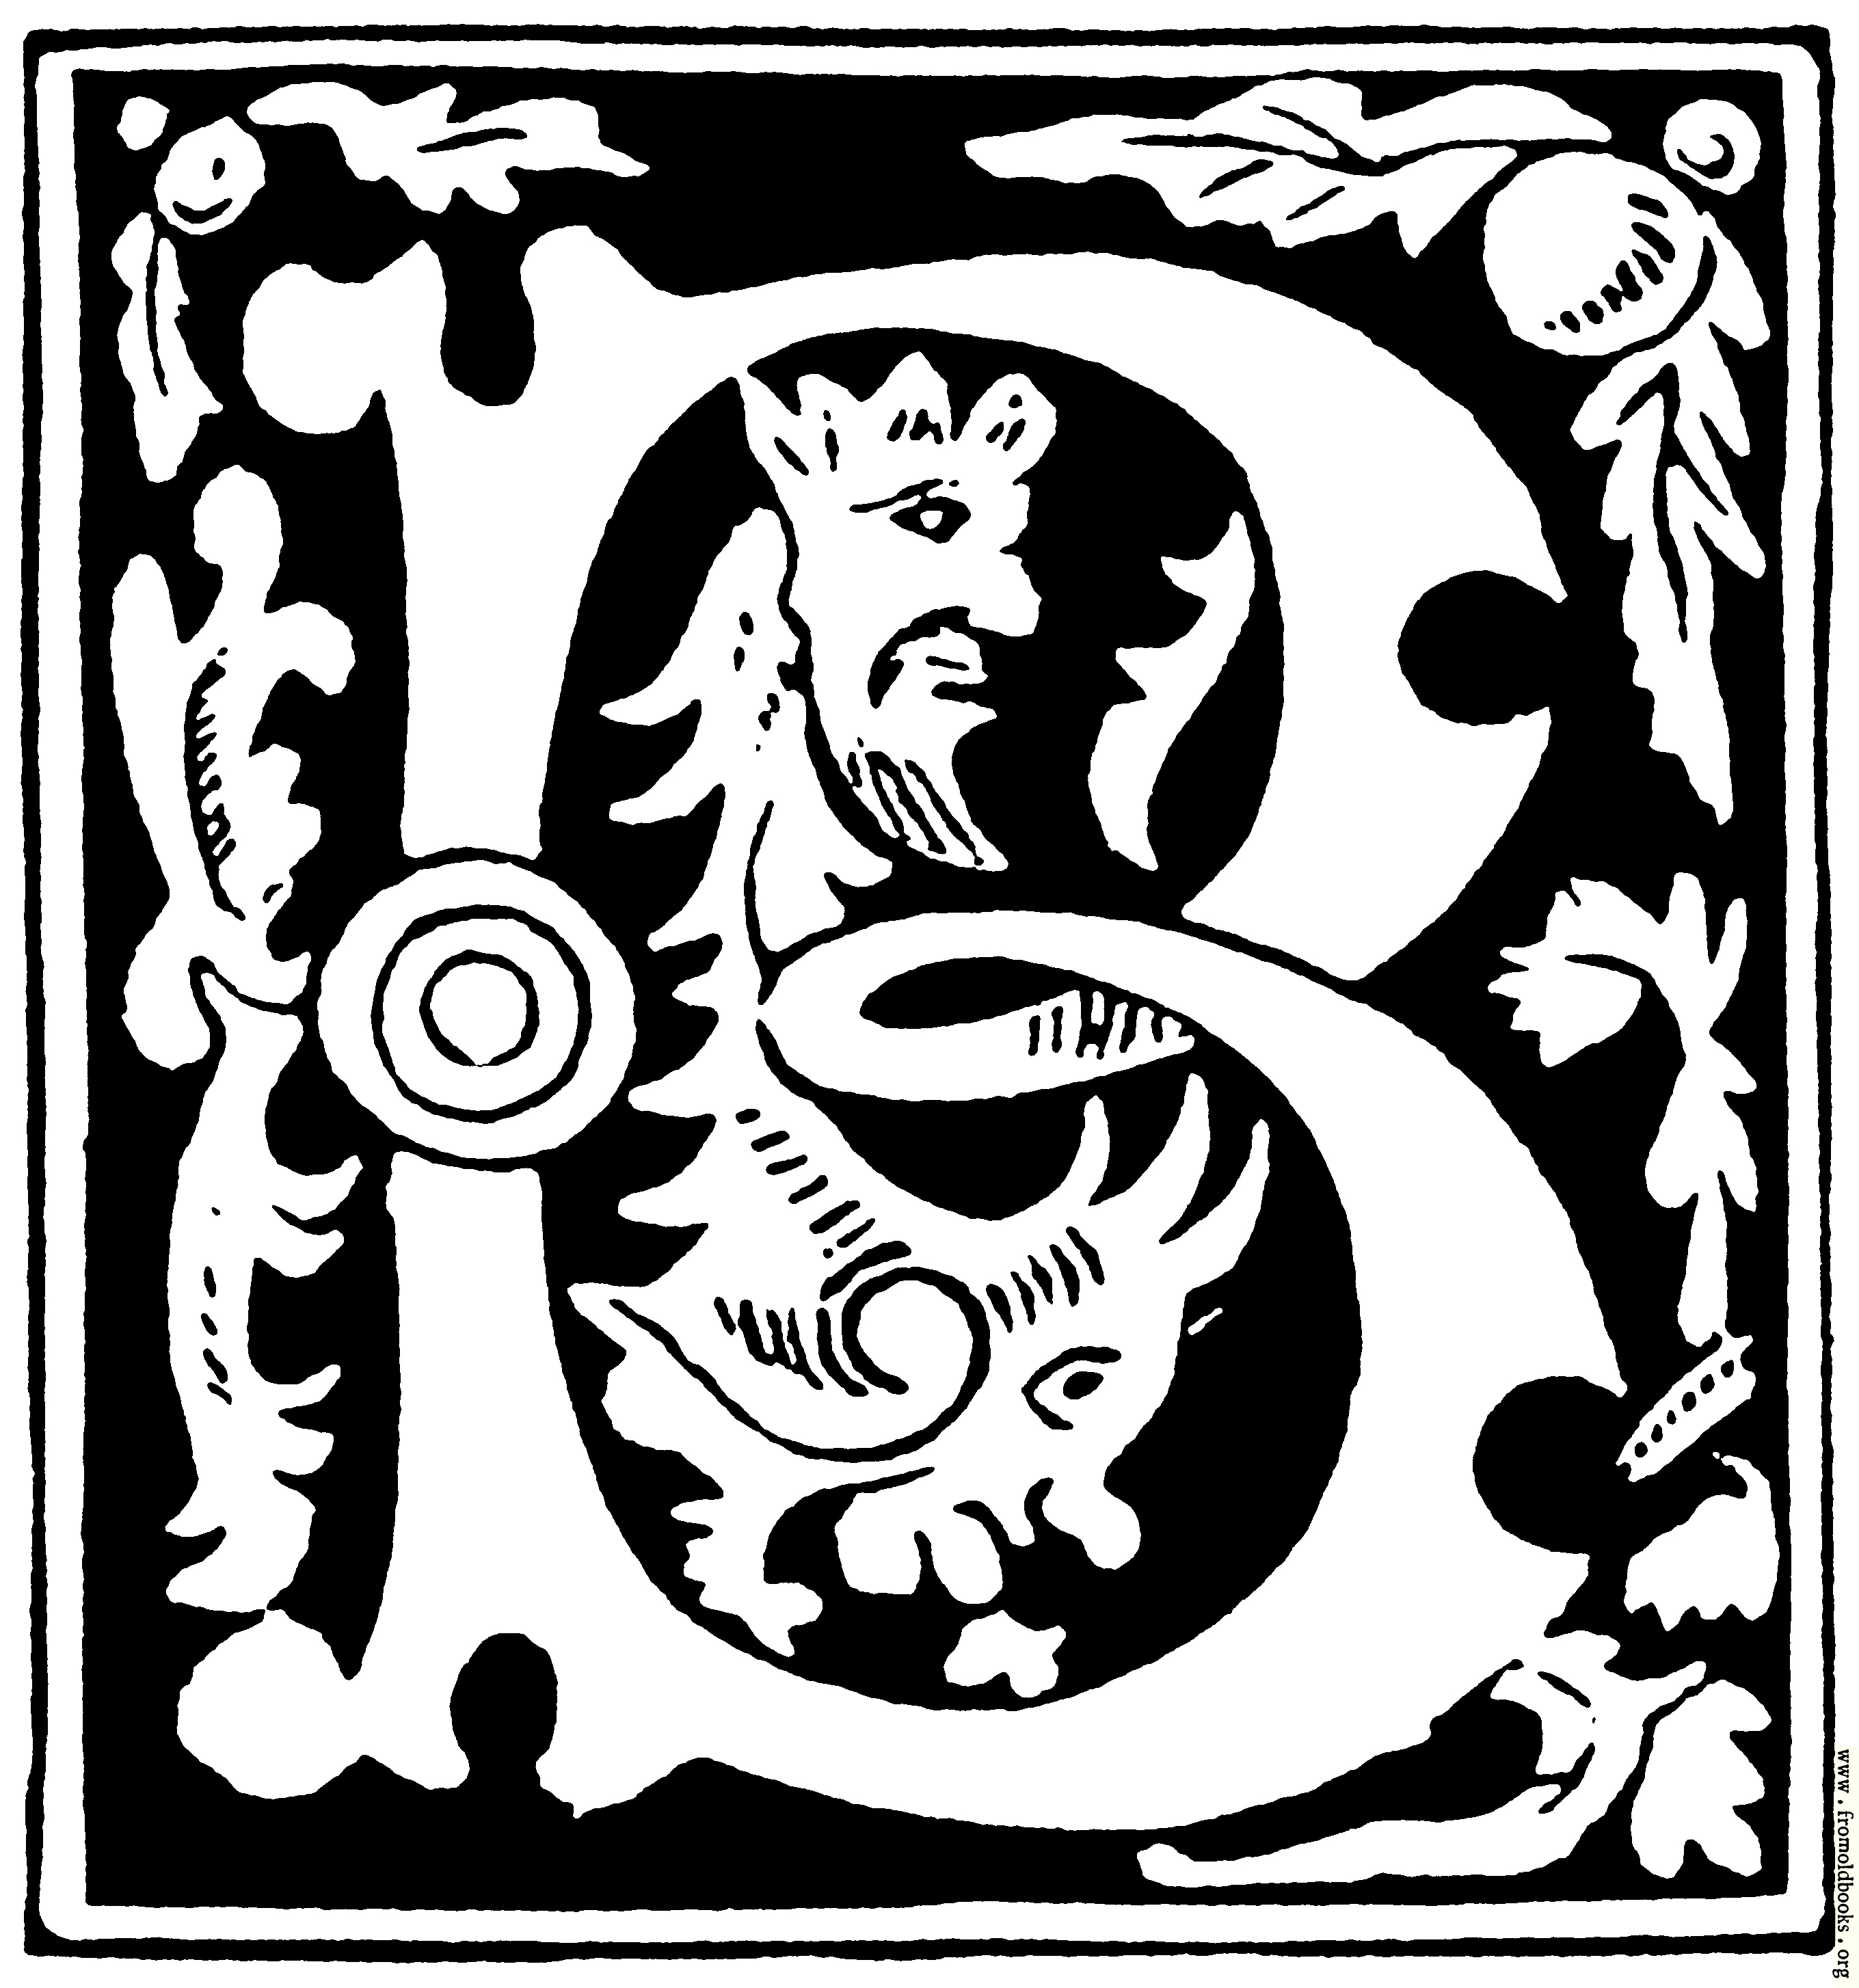 Decorative Initial Letter B From 16th Century